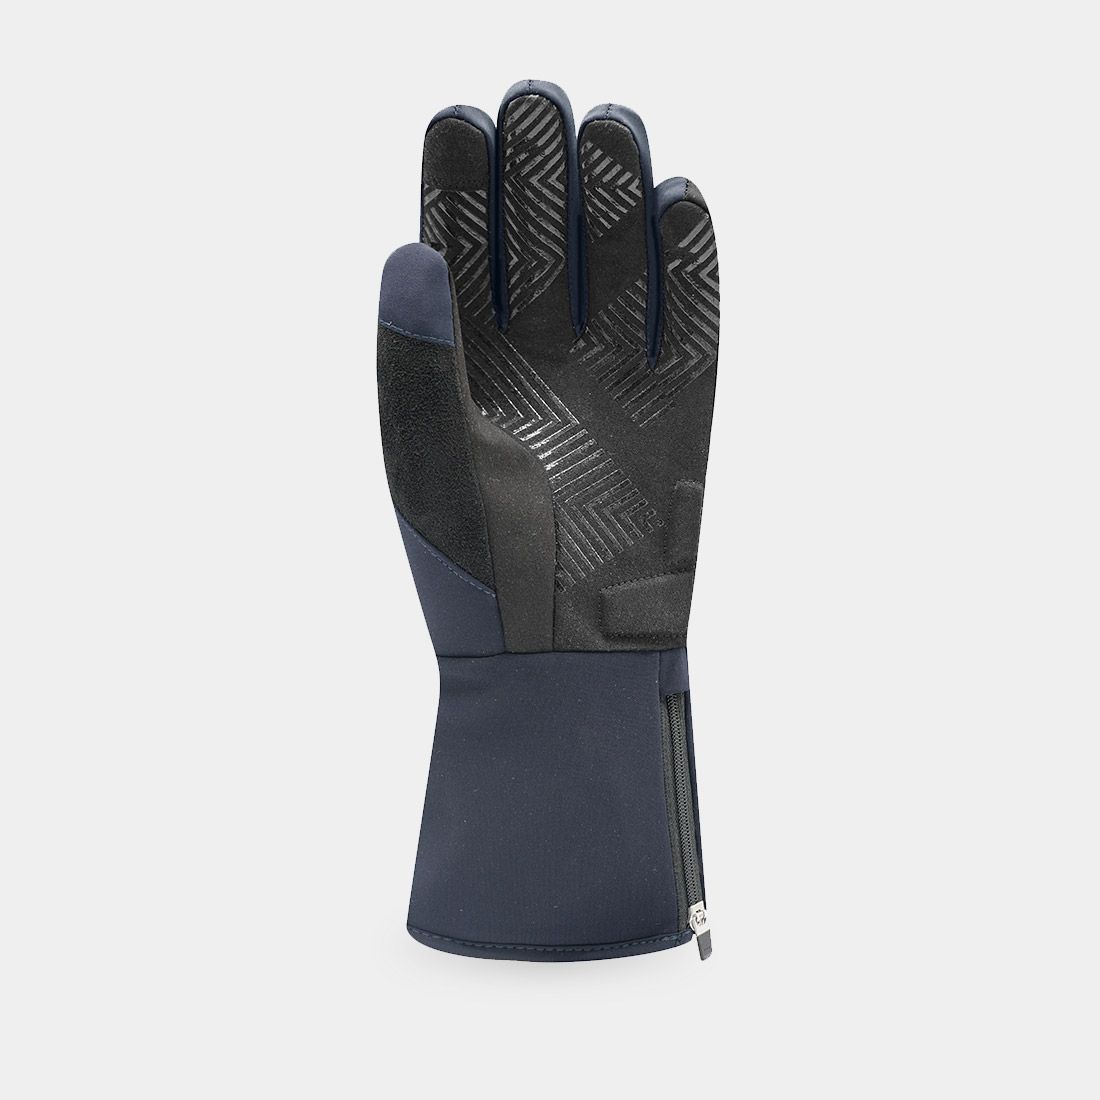 EGLOVE 4 - Heated cycling gloves